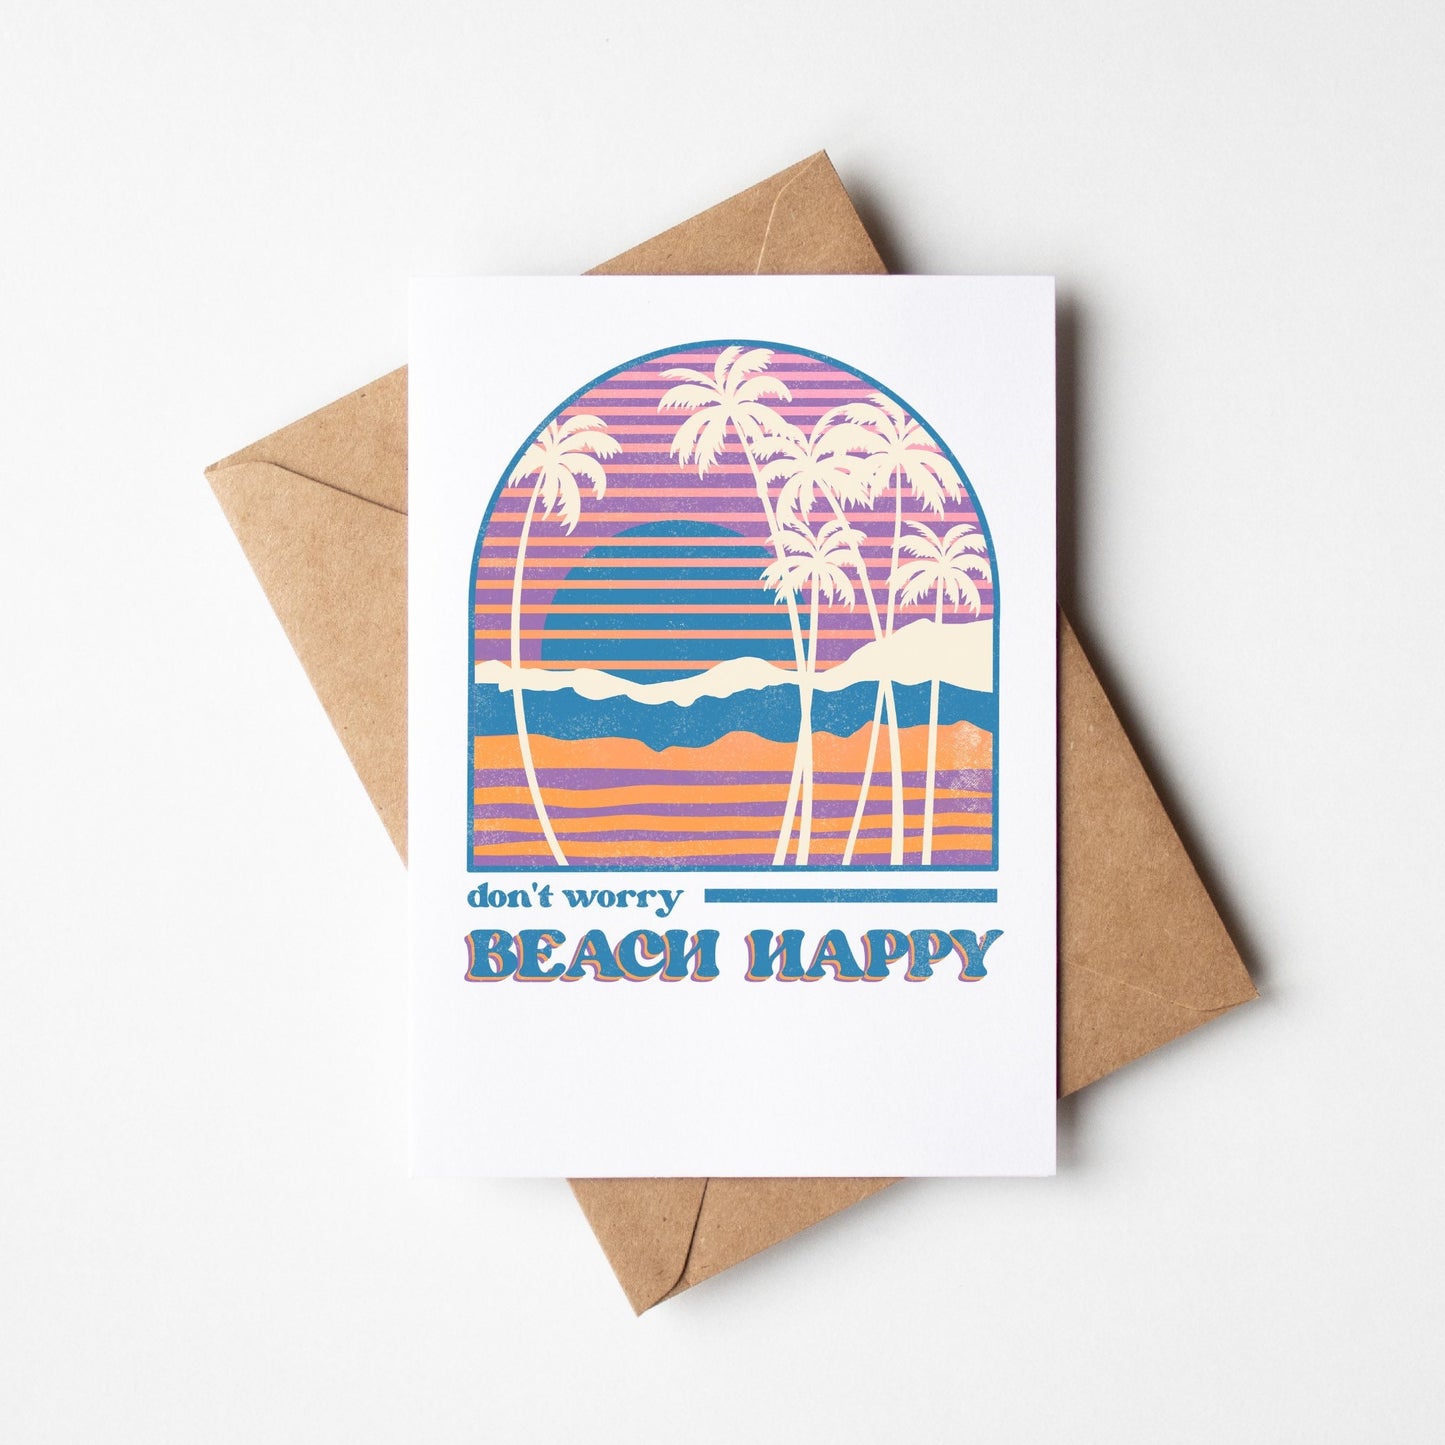 SUBLIMATION ready to press transfer- Don’t worry Beach happy summer design tshirt transfer